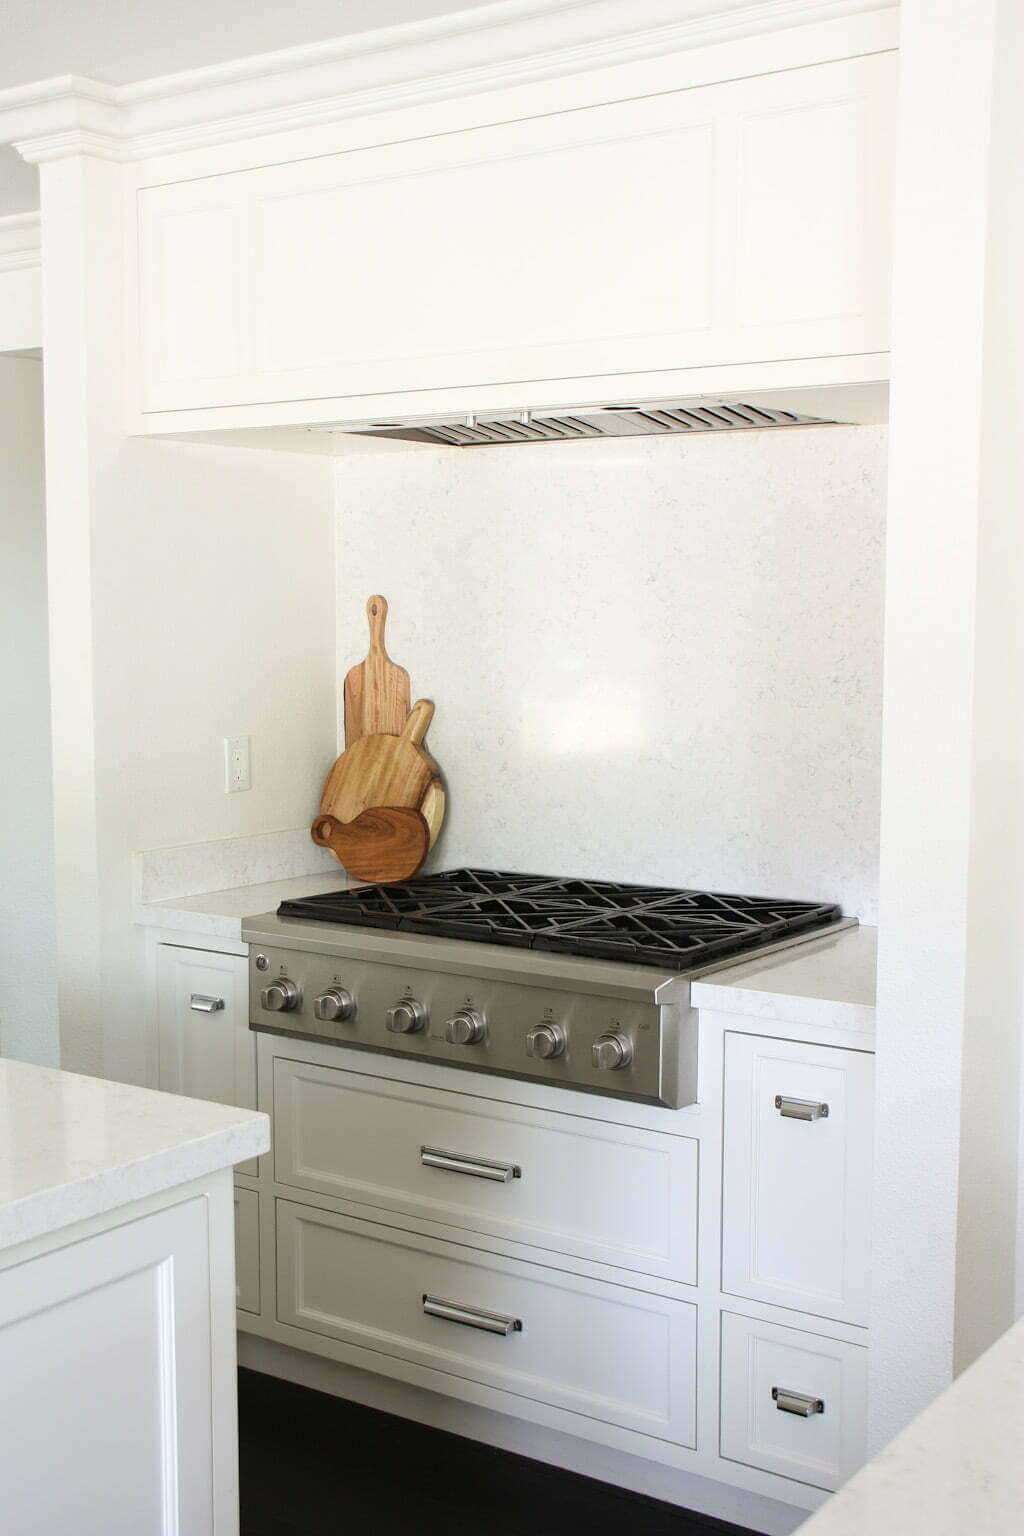 white kitchen stove area with drawers below, quartz backsplash solid, hood and white wood hood above, and gas stove